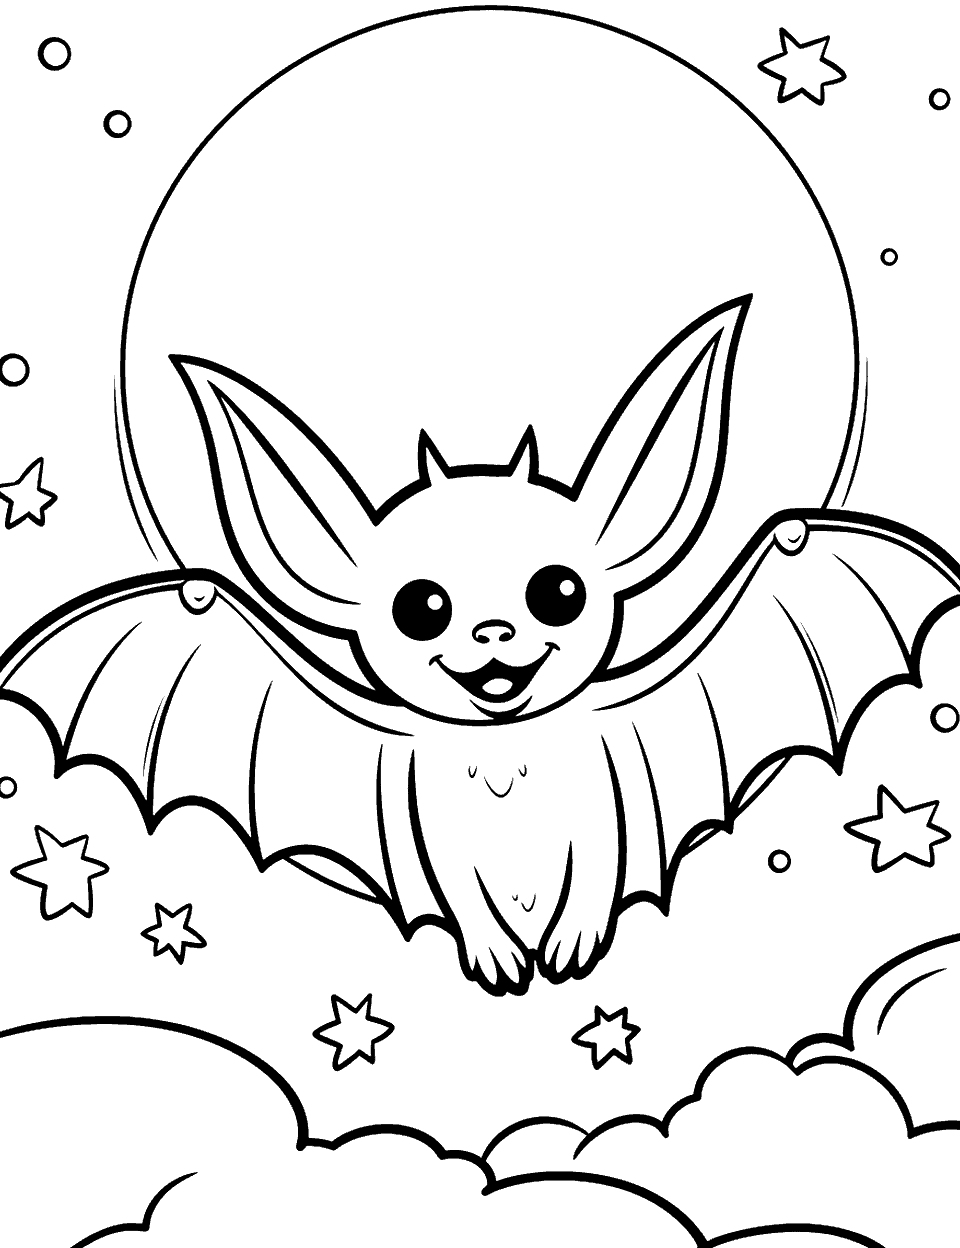 Halloween Night Adventure Bat Coloring Page - A bat flying under a full moon with a background of a starry night sky.